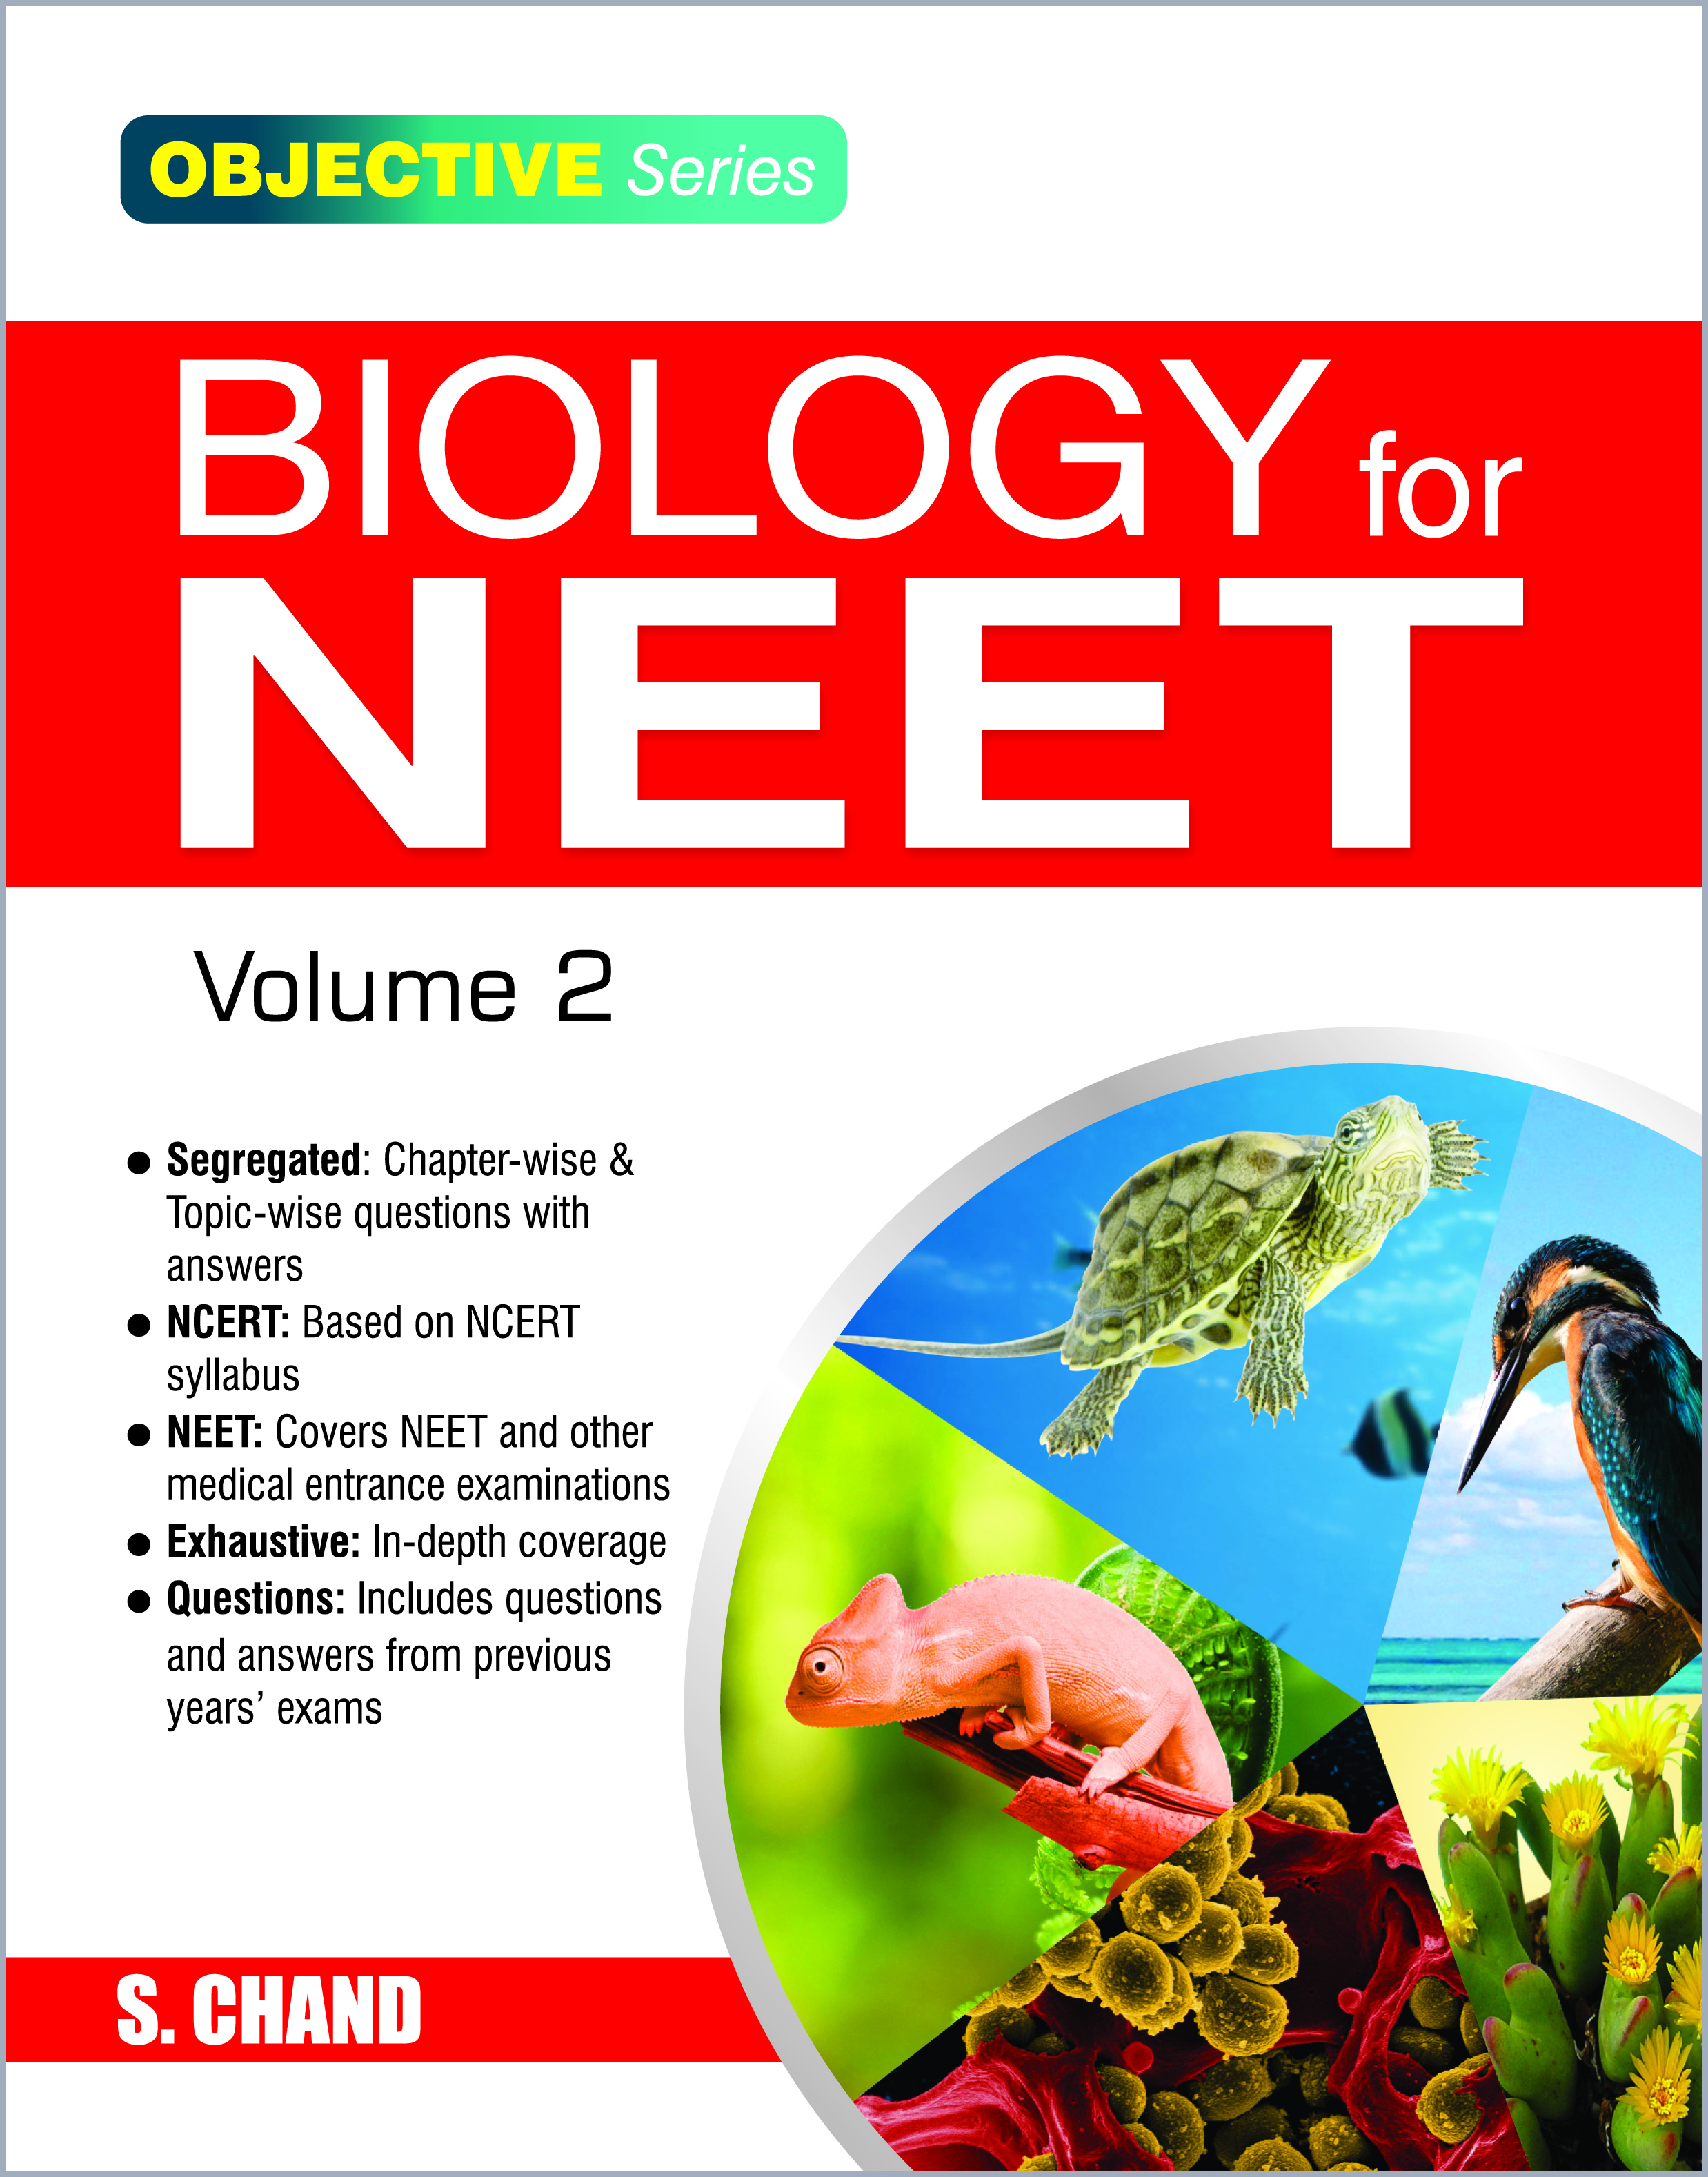 Biology for NEET Volume-2 (Objective Series)